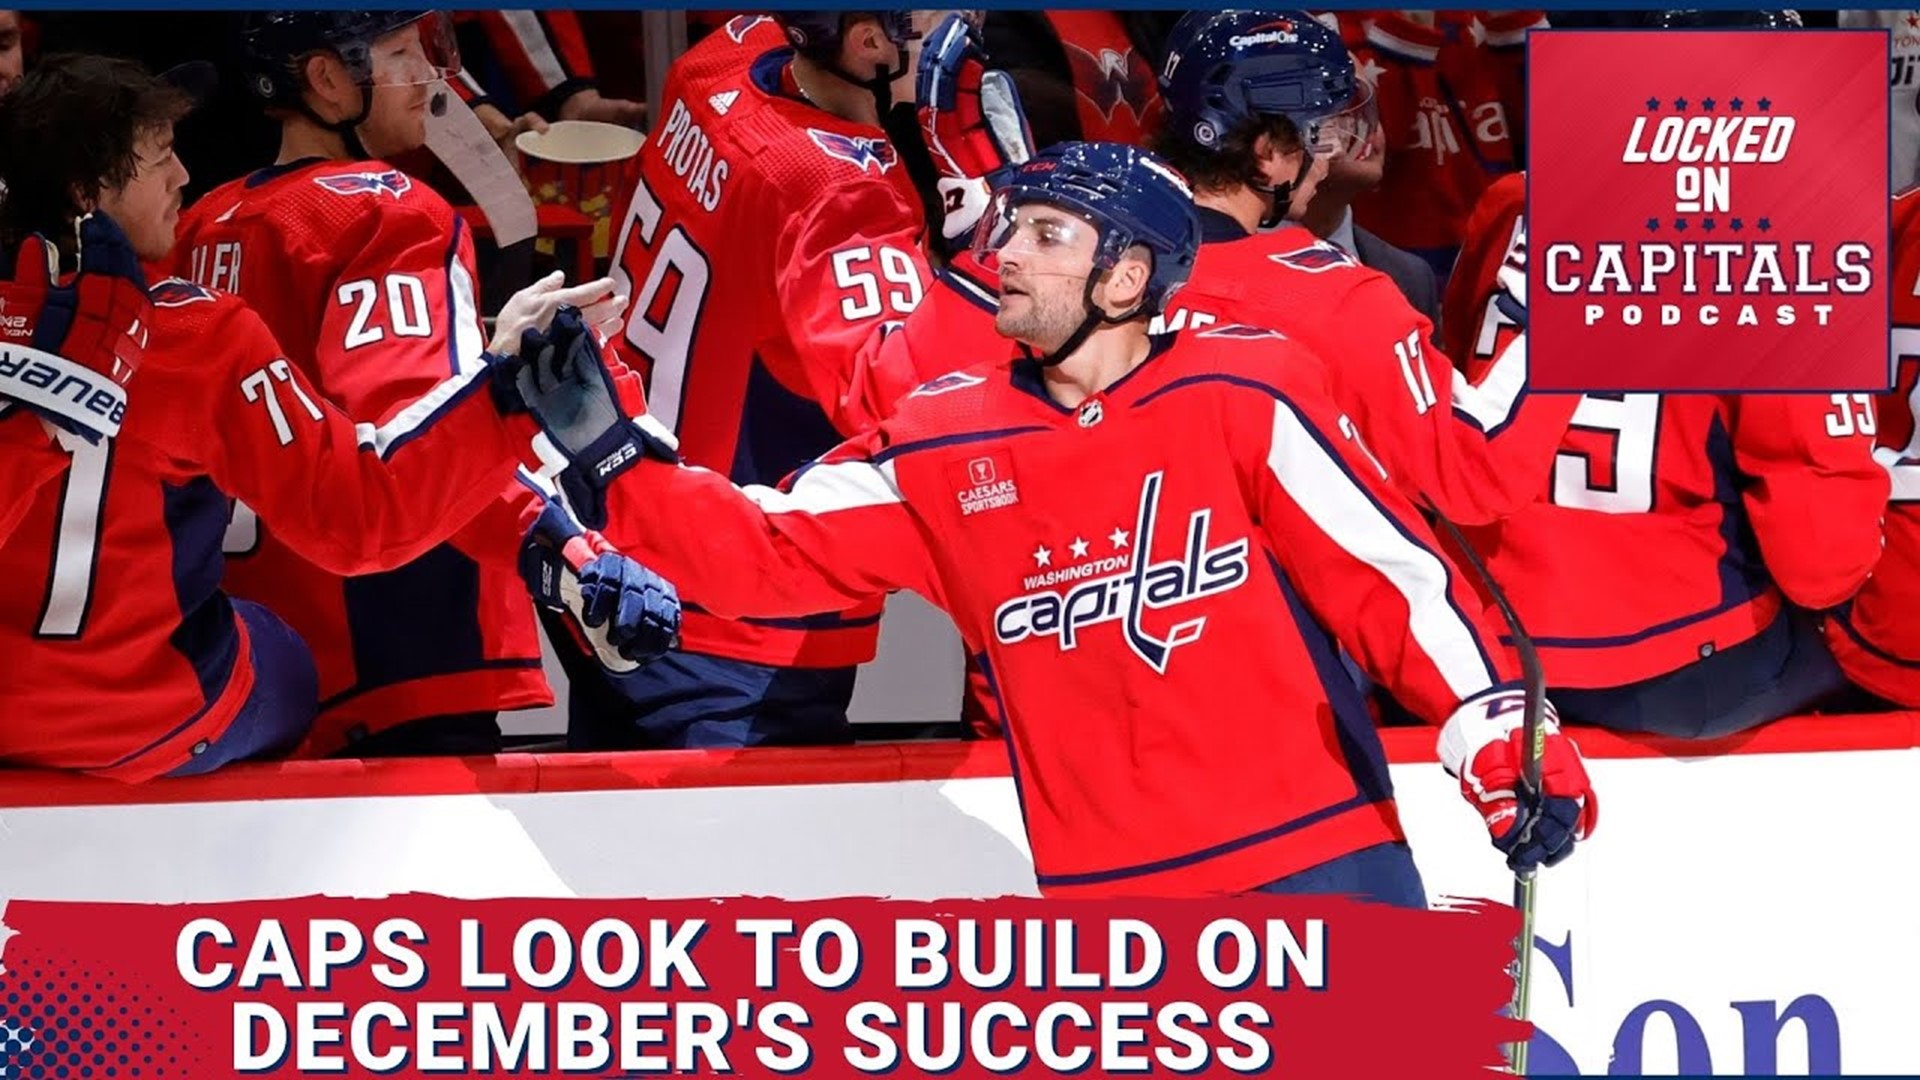 In this edition of Locked on Capitals Ben Raby of the Caps This Morning Podcast and Caps Radio joins the show.